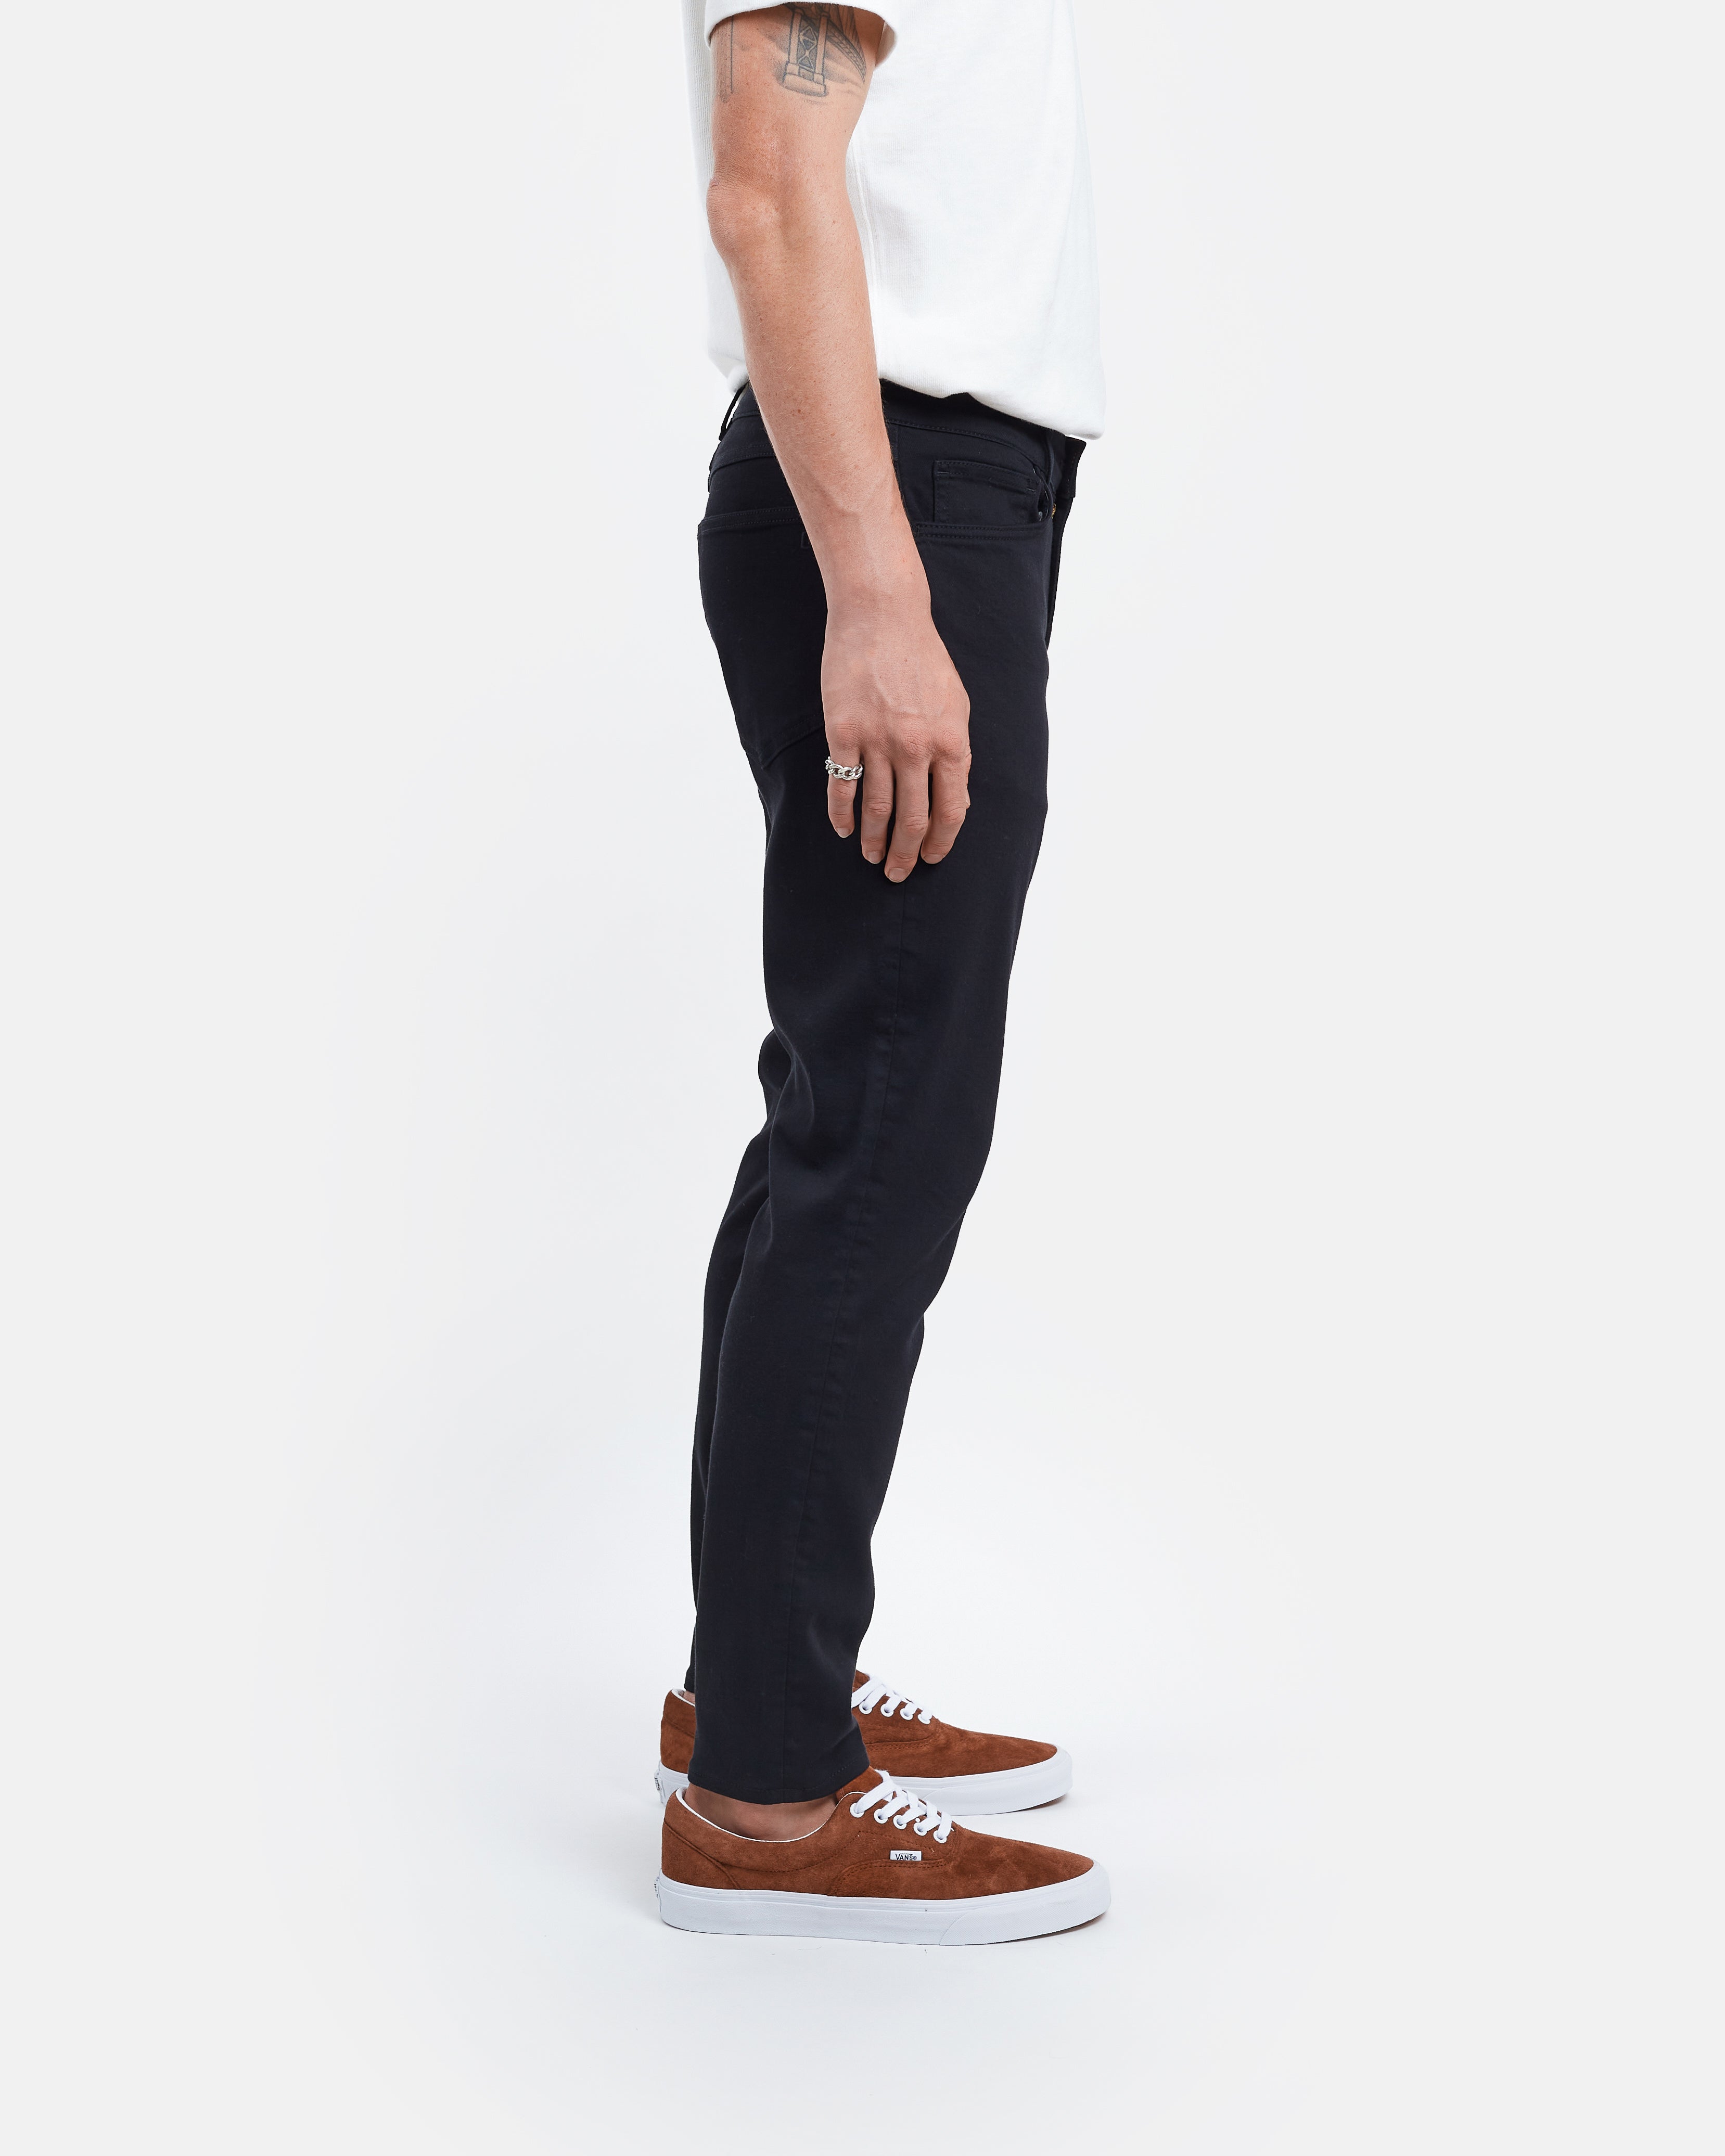 Masculine Collection - Custom Fit Jeans For Men - Unspun